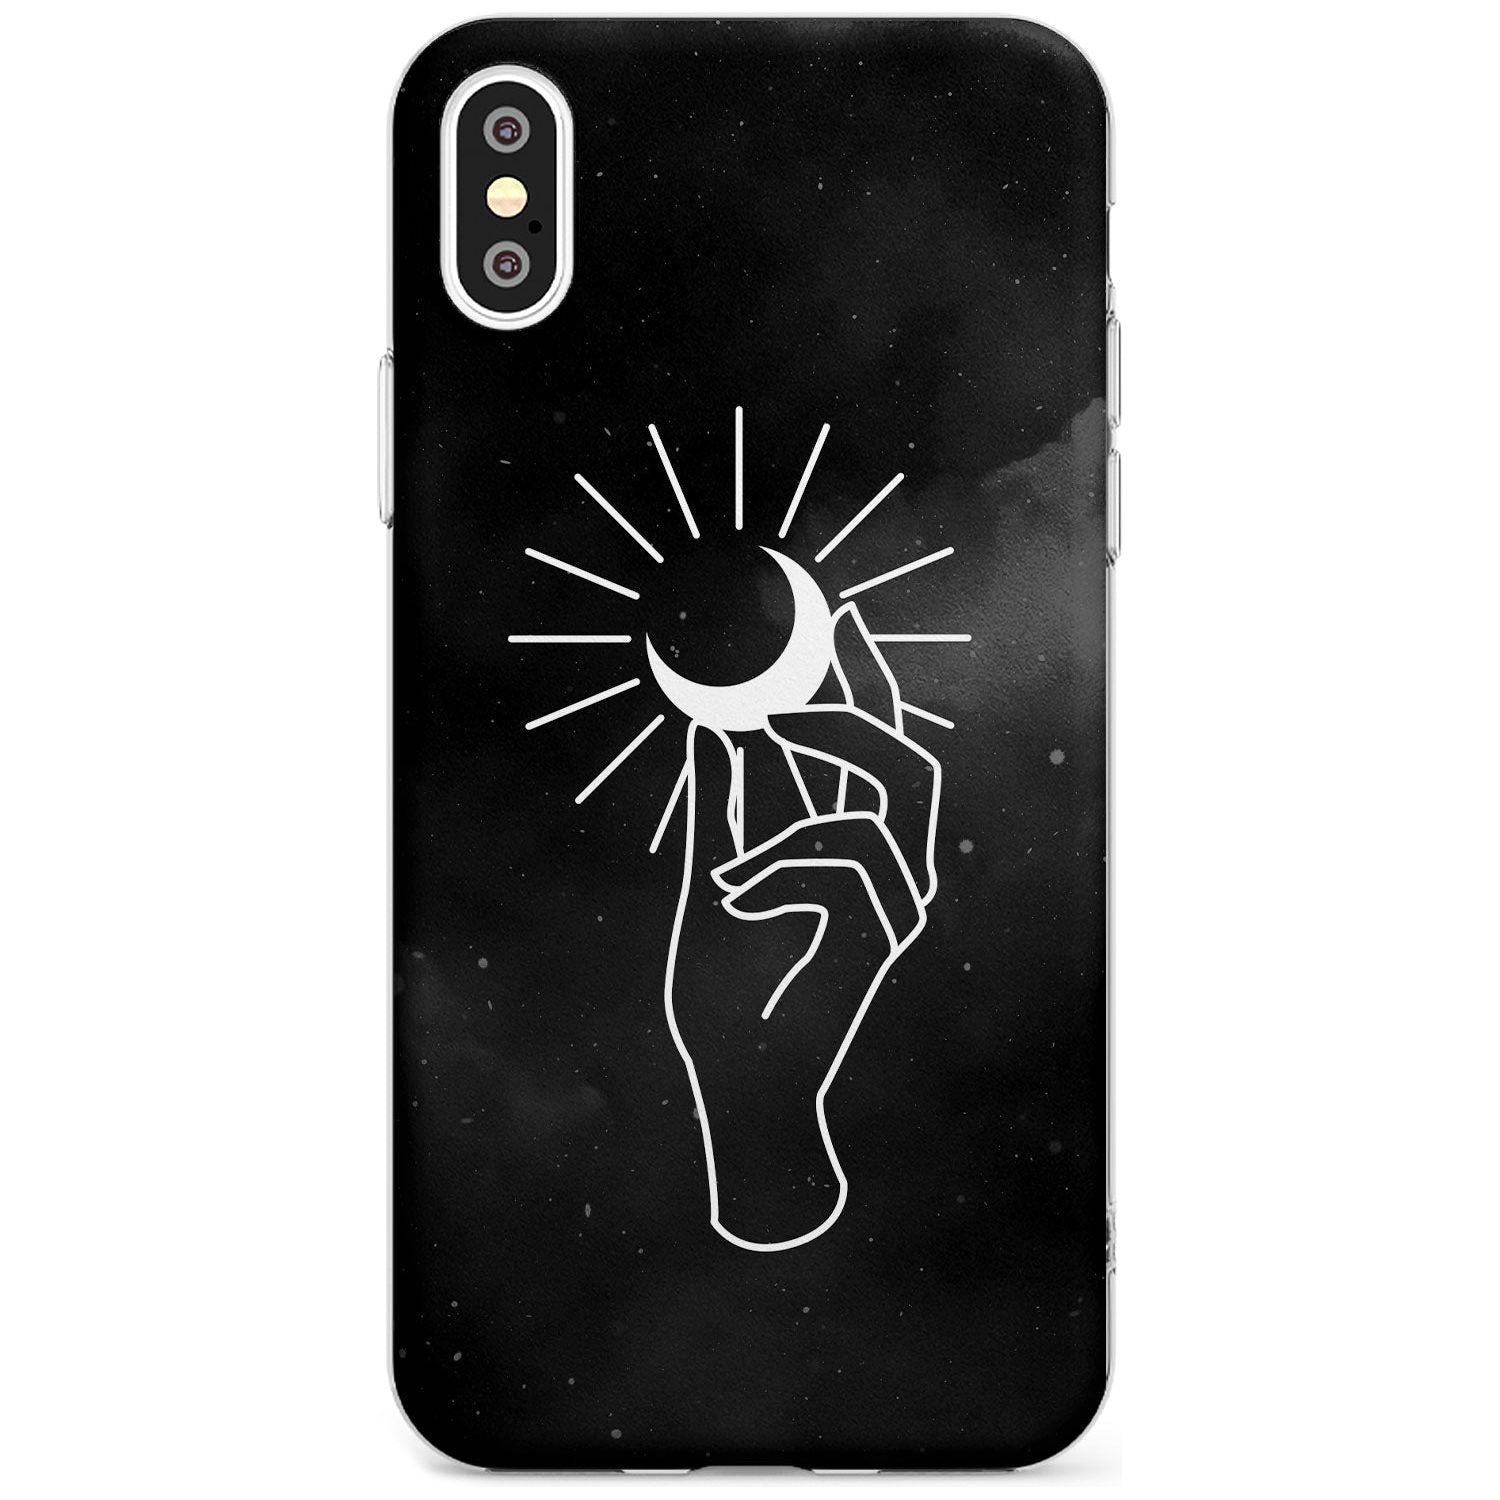 Hand Holding Moon Black Impact Phone Case for iPhone X XS Max XR